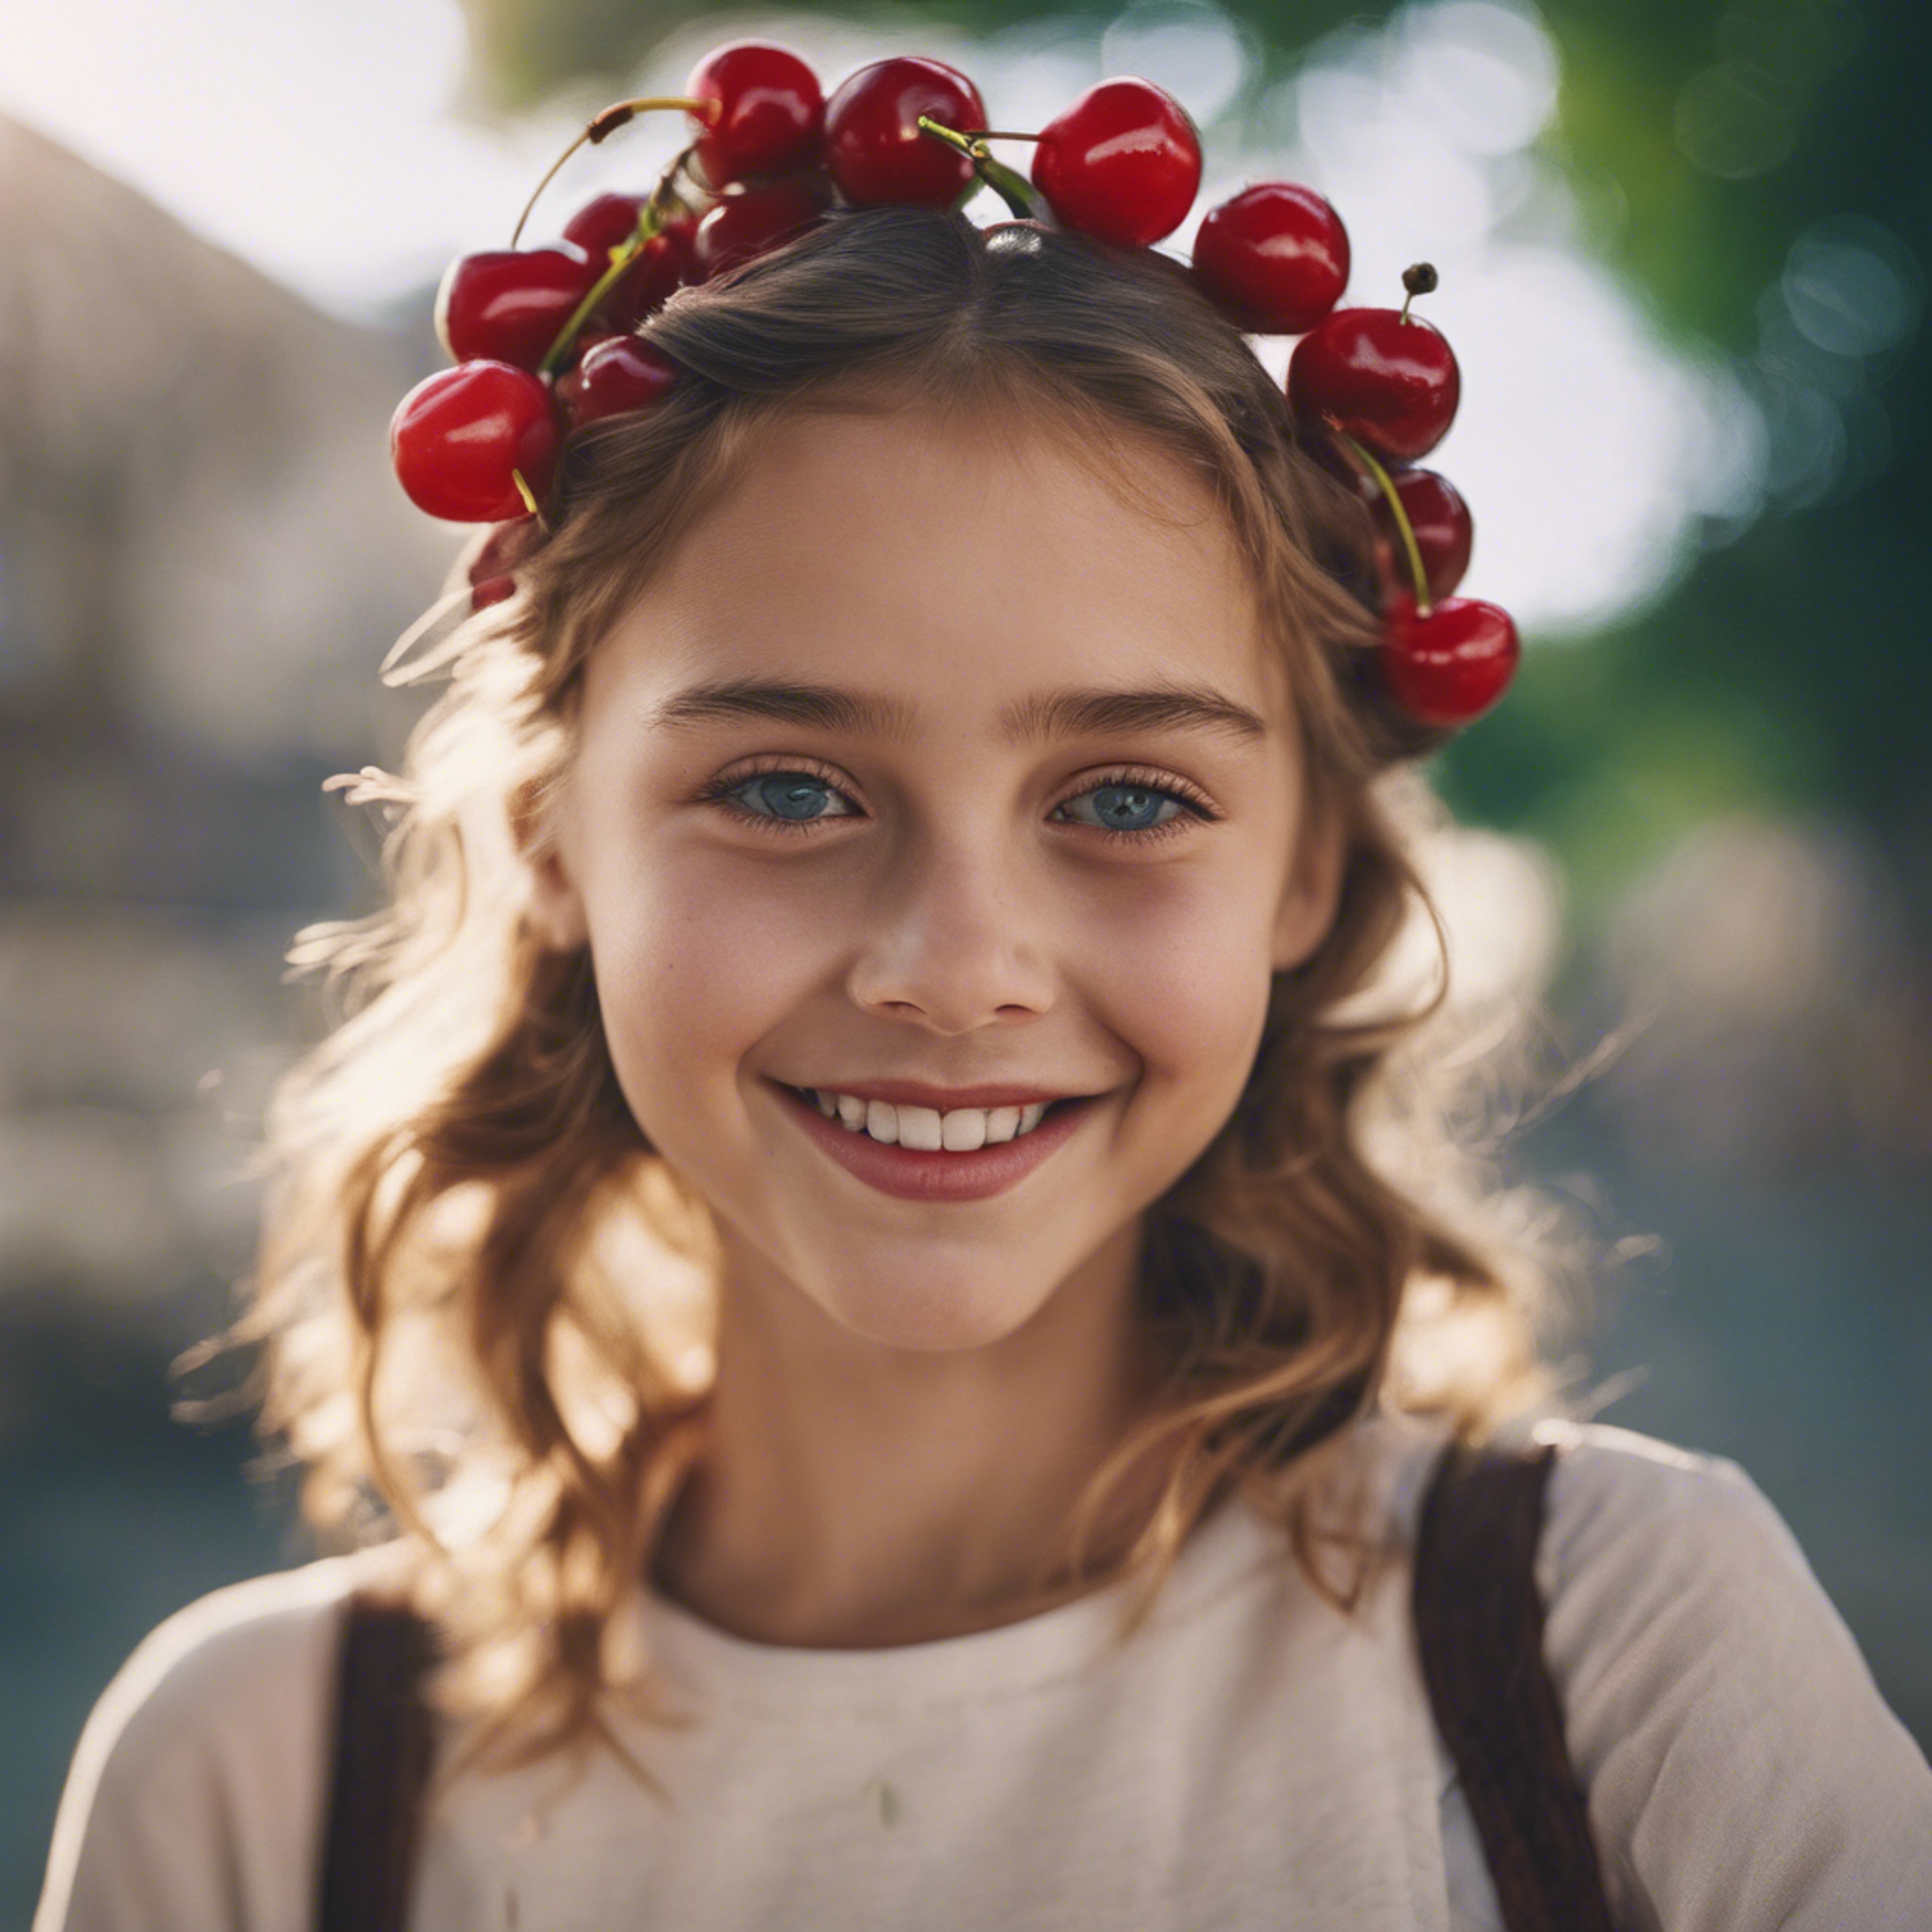 A girl with a cherry barrette in her hair, smiling at the viewer. ورق الجدران[3ffde2b89a9346a6b02b]